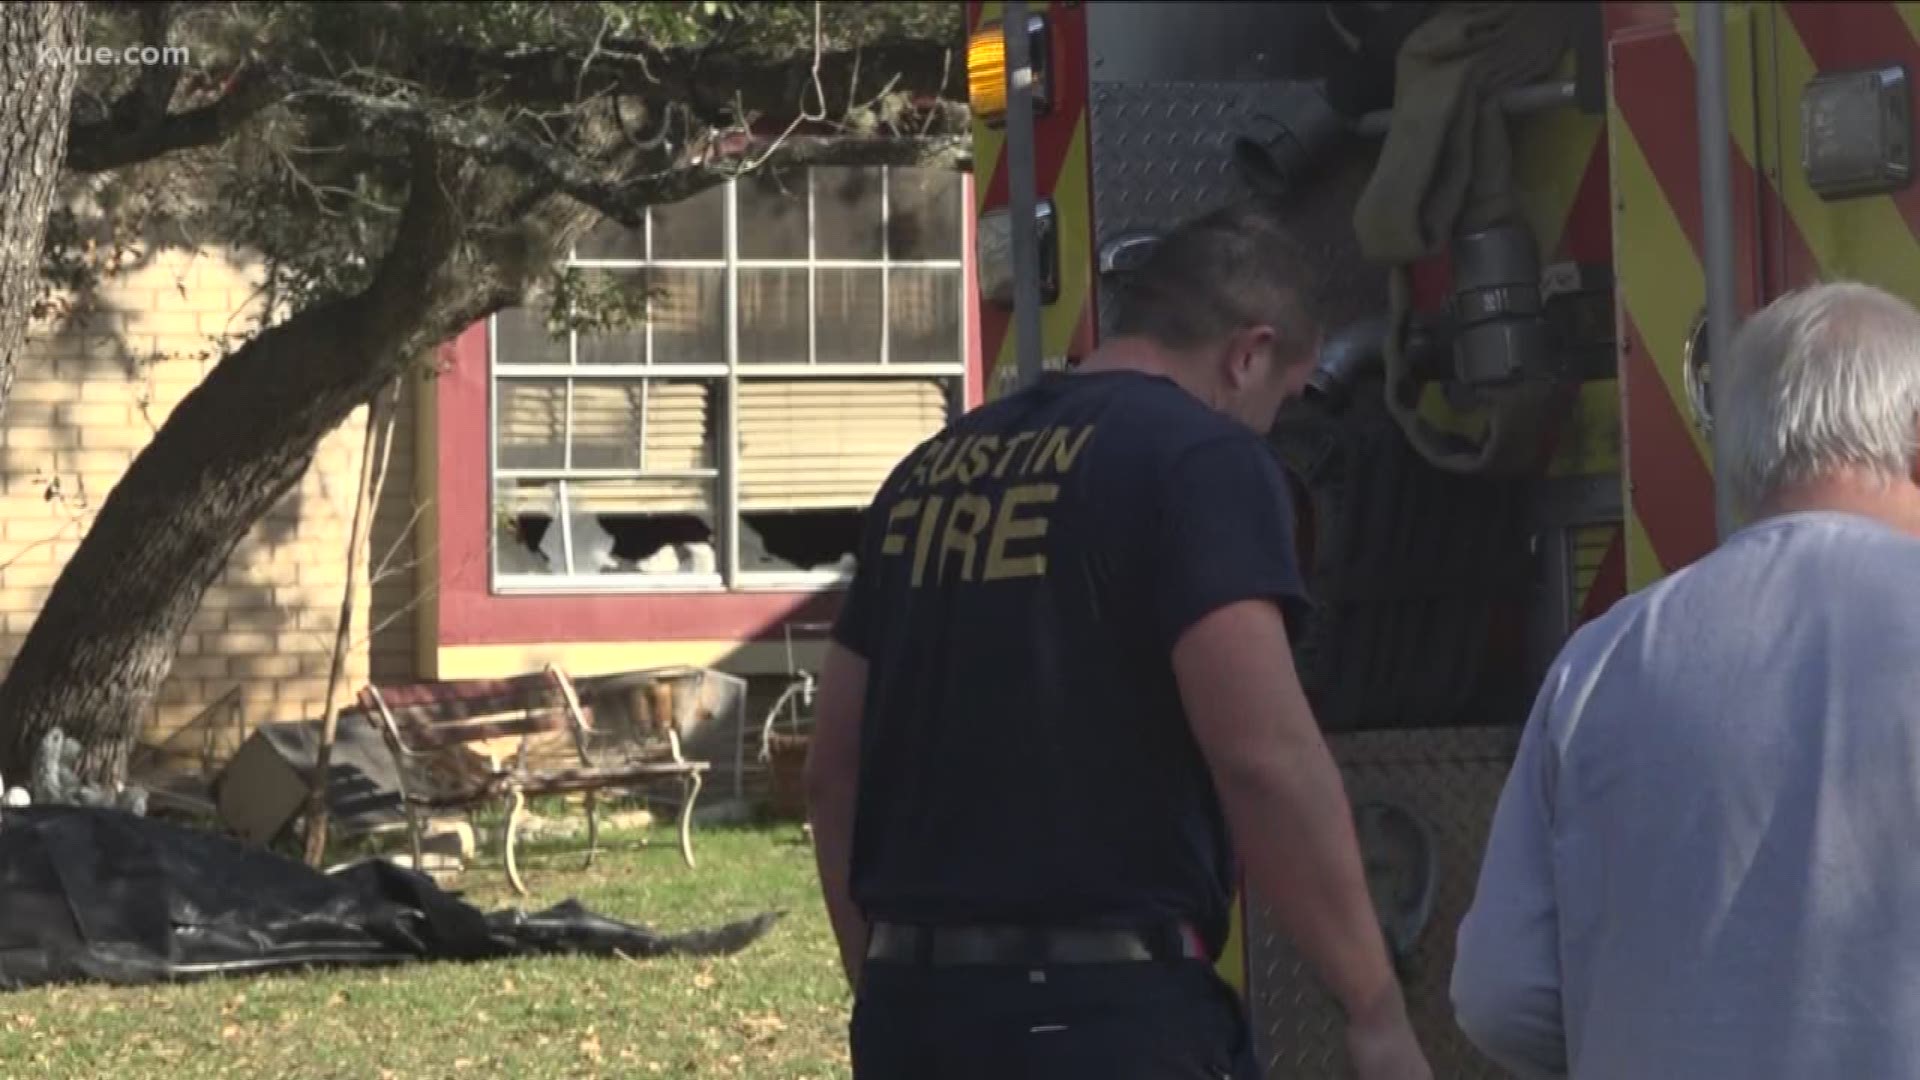 At least 10 pets lost their lives in the house fire.